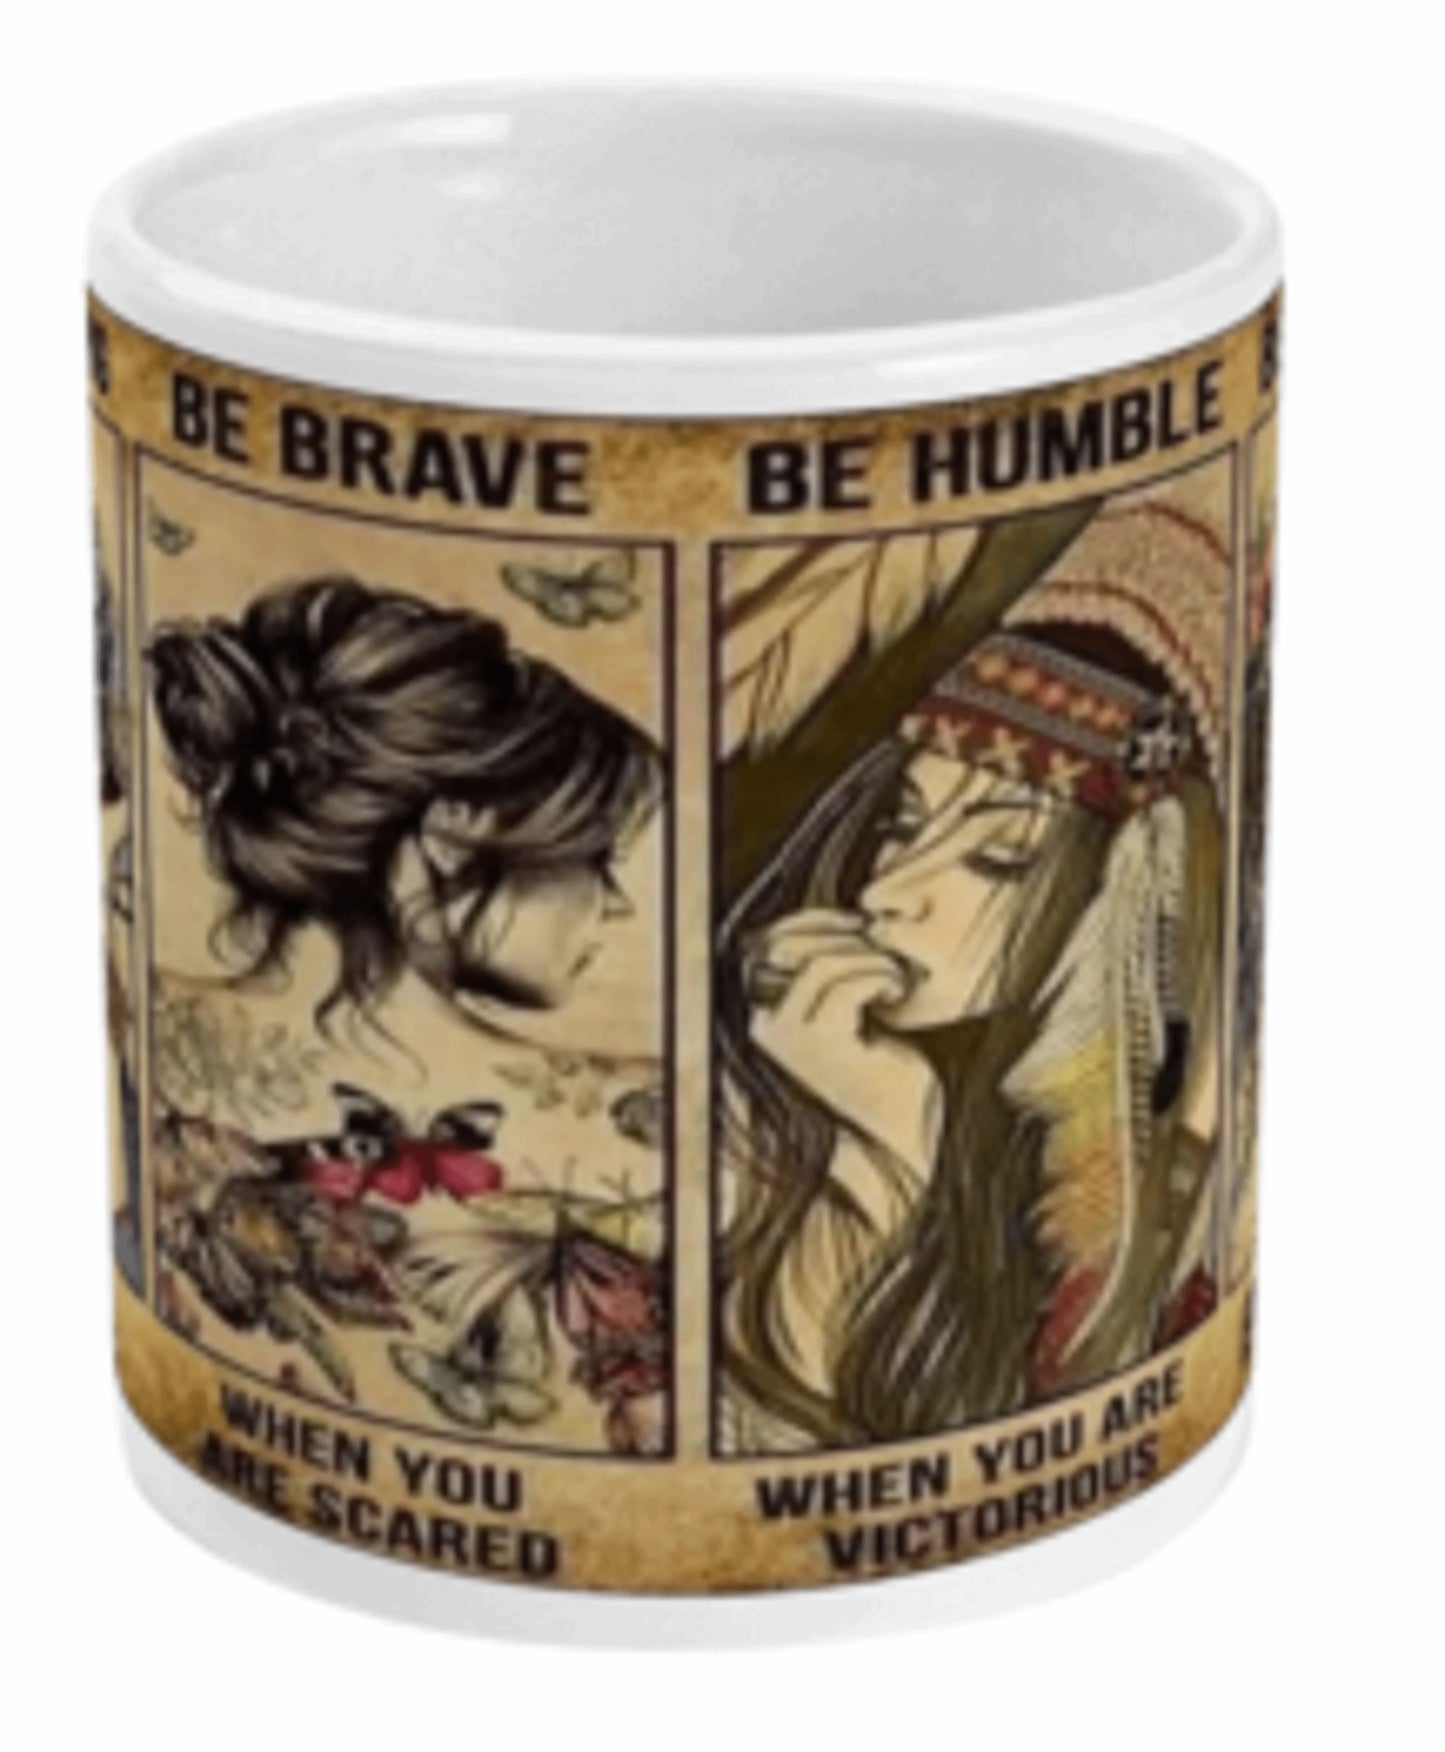  Be Strong Be Brave Coffee Mug by Free Spirit Accessories sold by Free Spirit Accessories